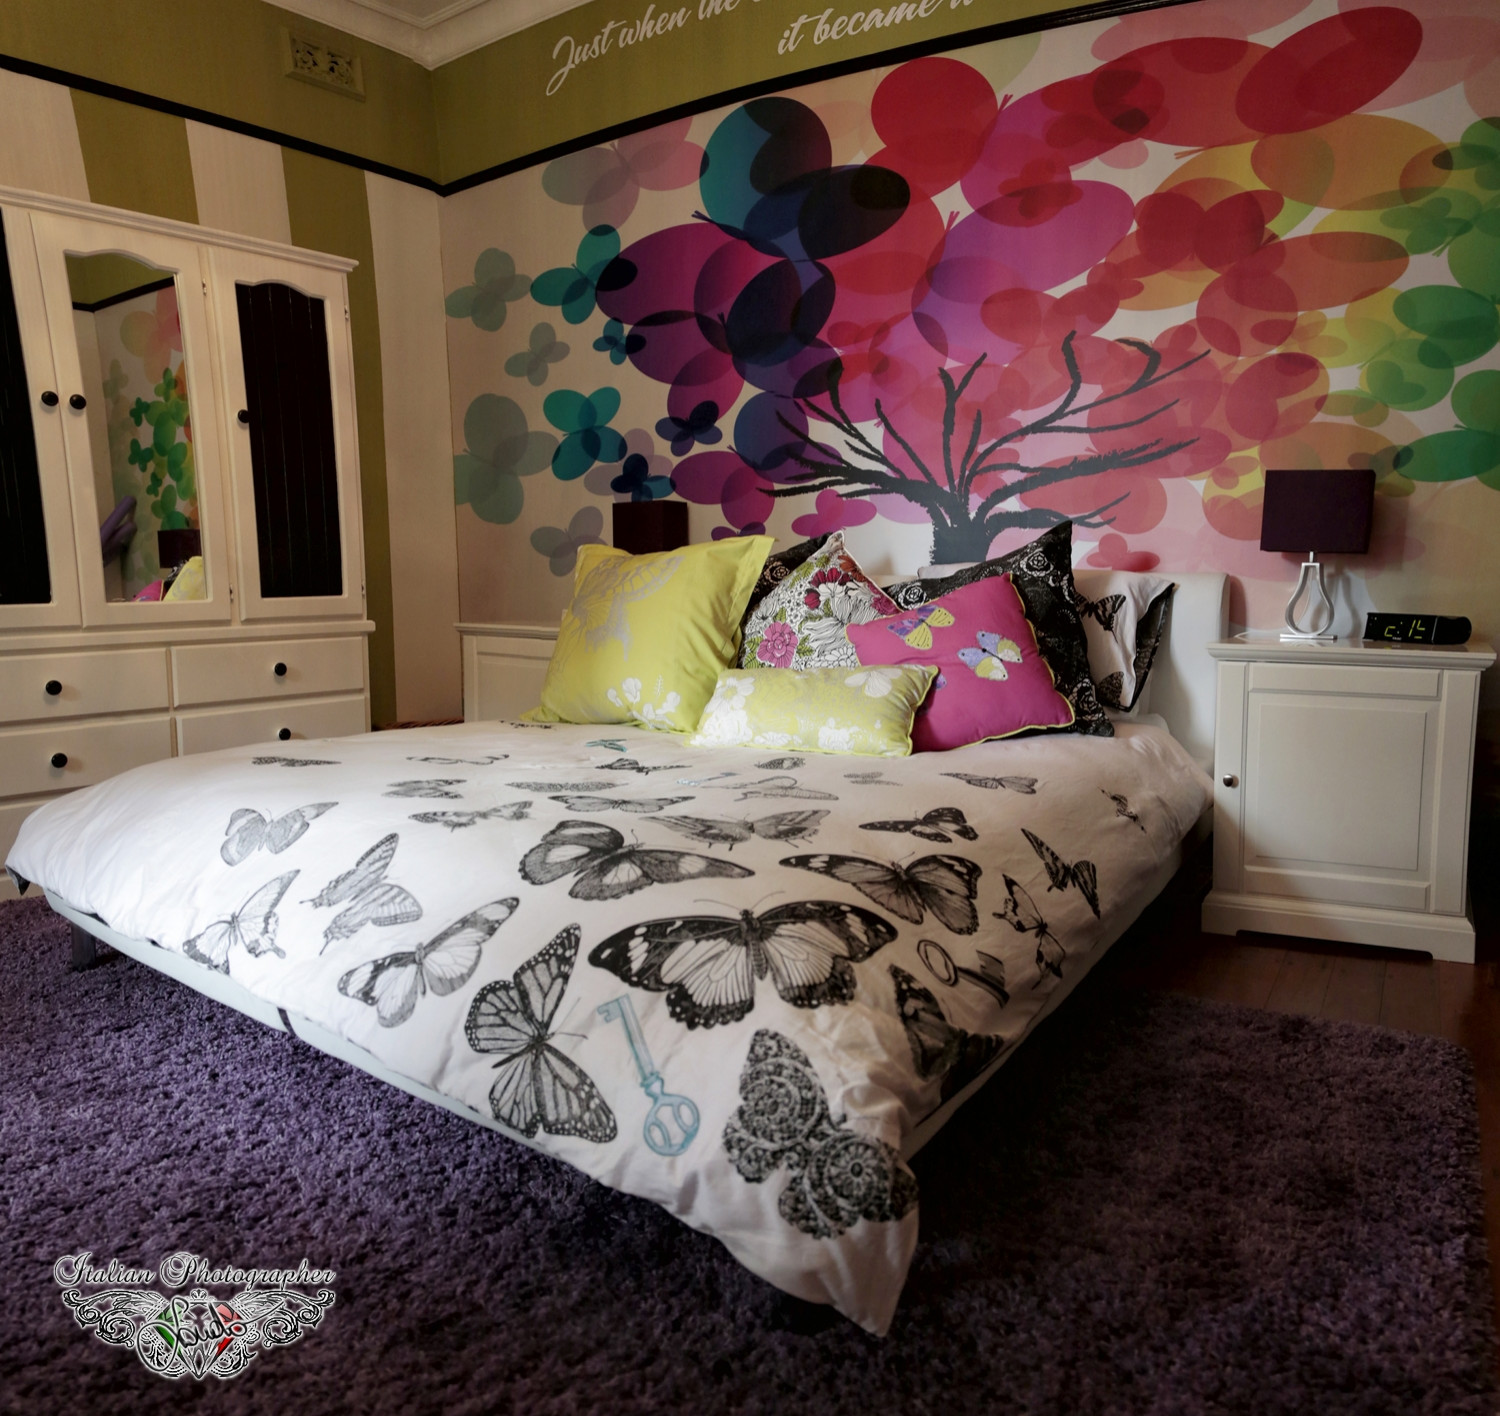 Starlight Children’s Foundation. Making a girls dream come true with a bedroom.